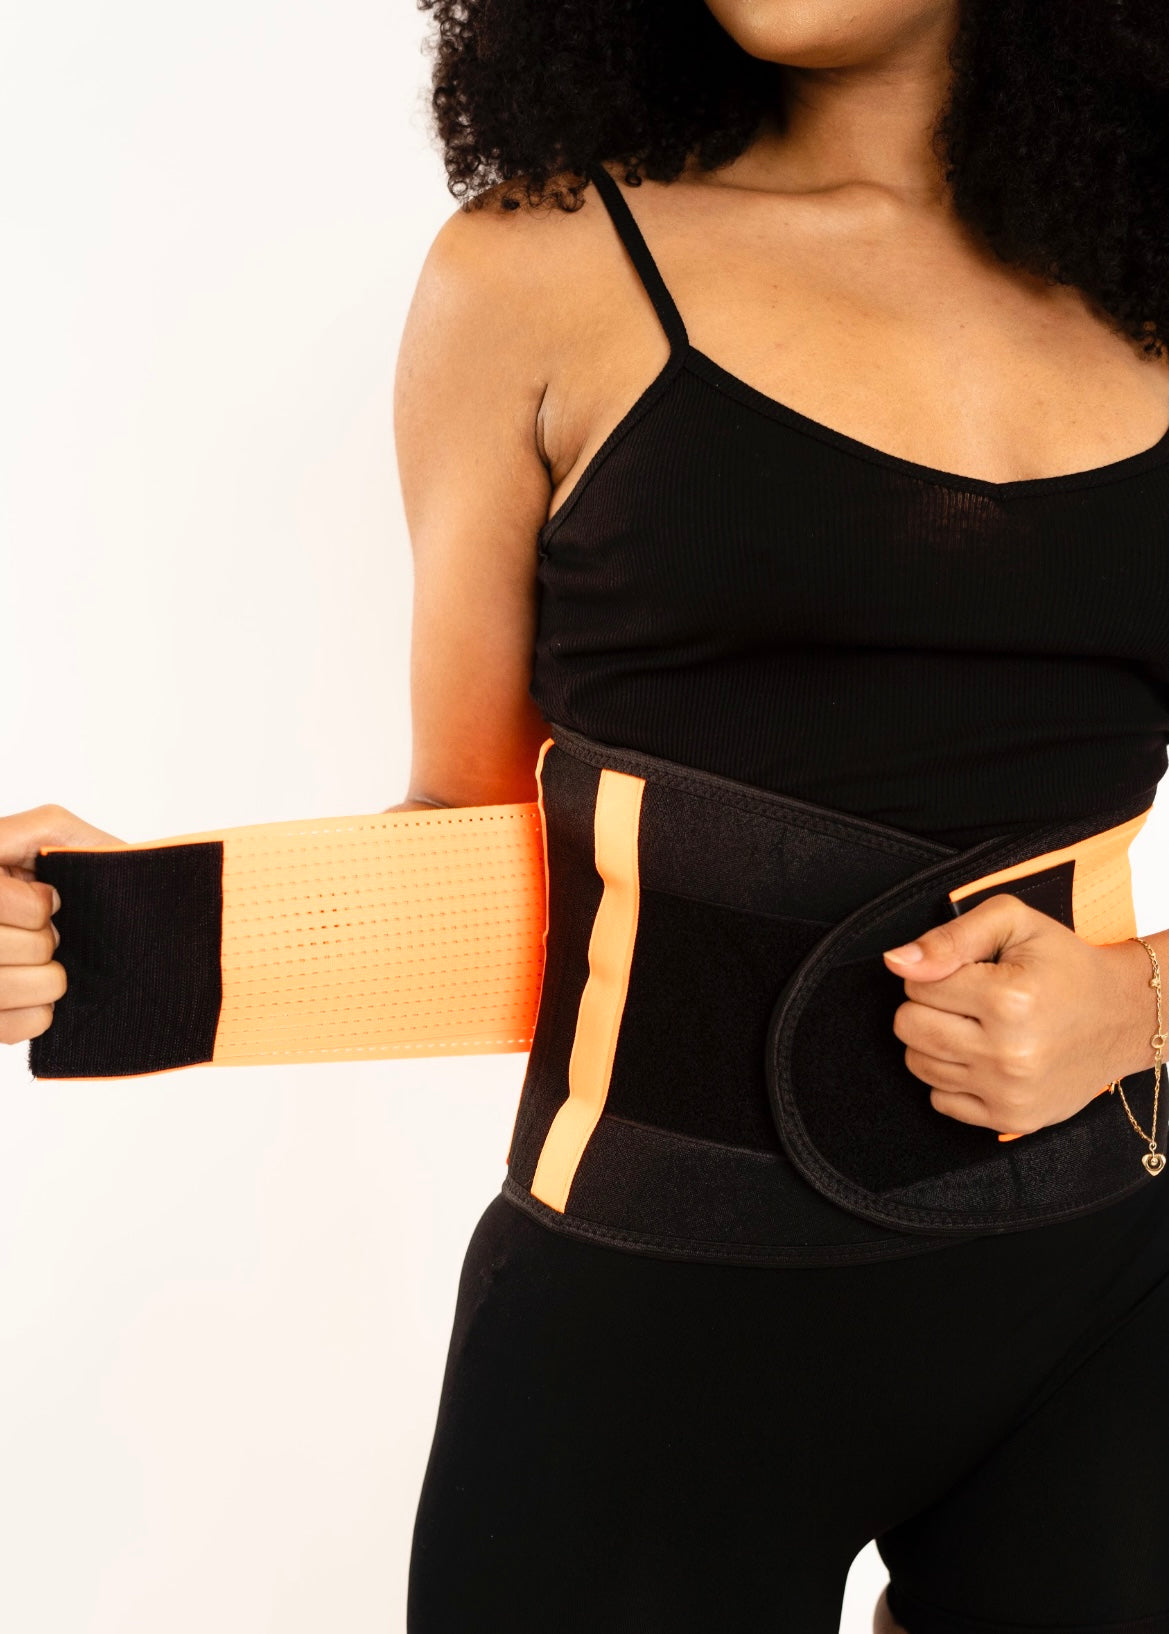 AheadStrong Slim Belt for Womens for Weight Loss